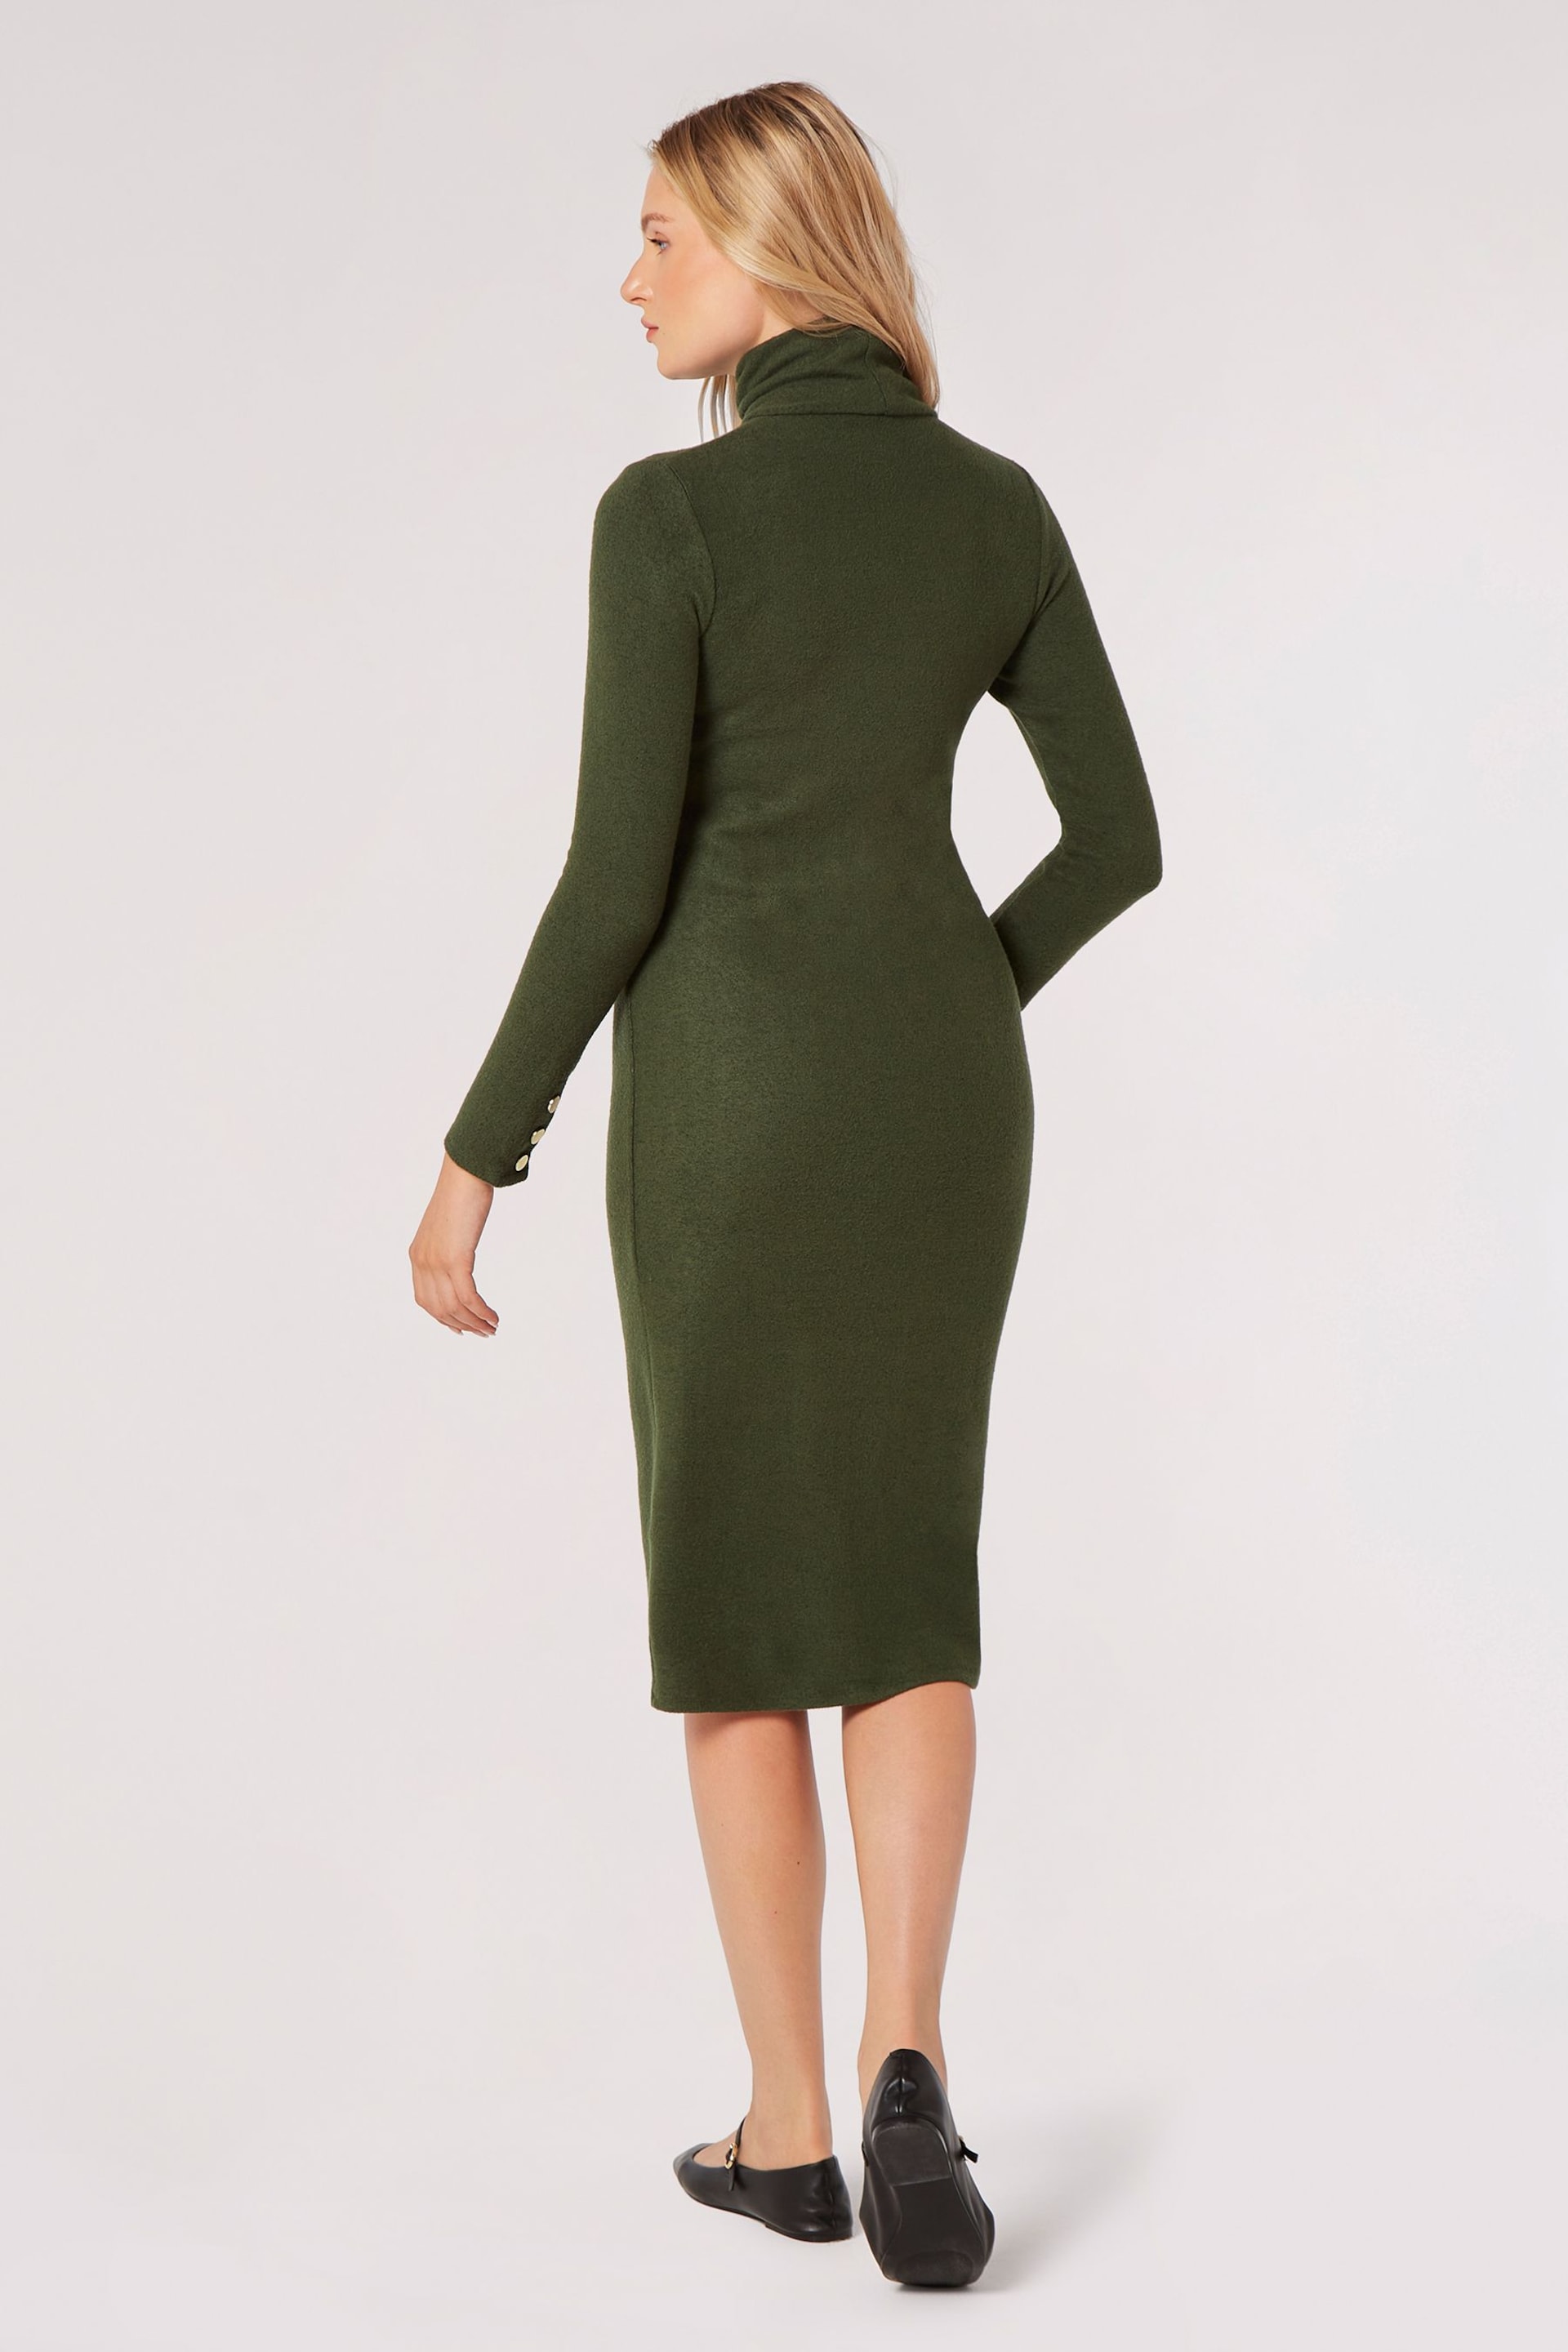 Apricot Green Roll Neck Column Dress - Image 2 of 4